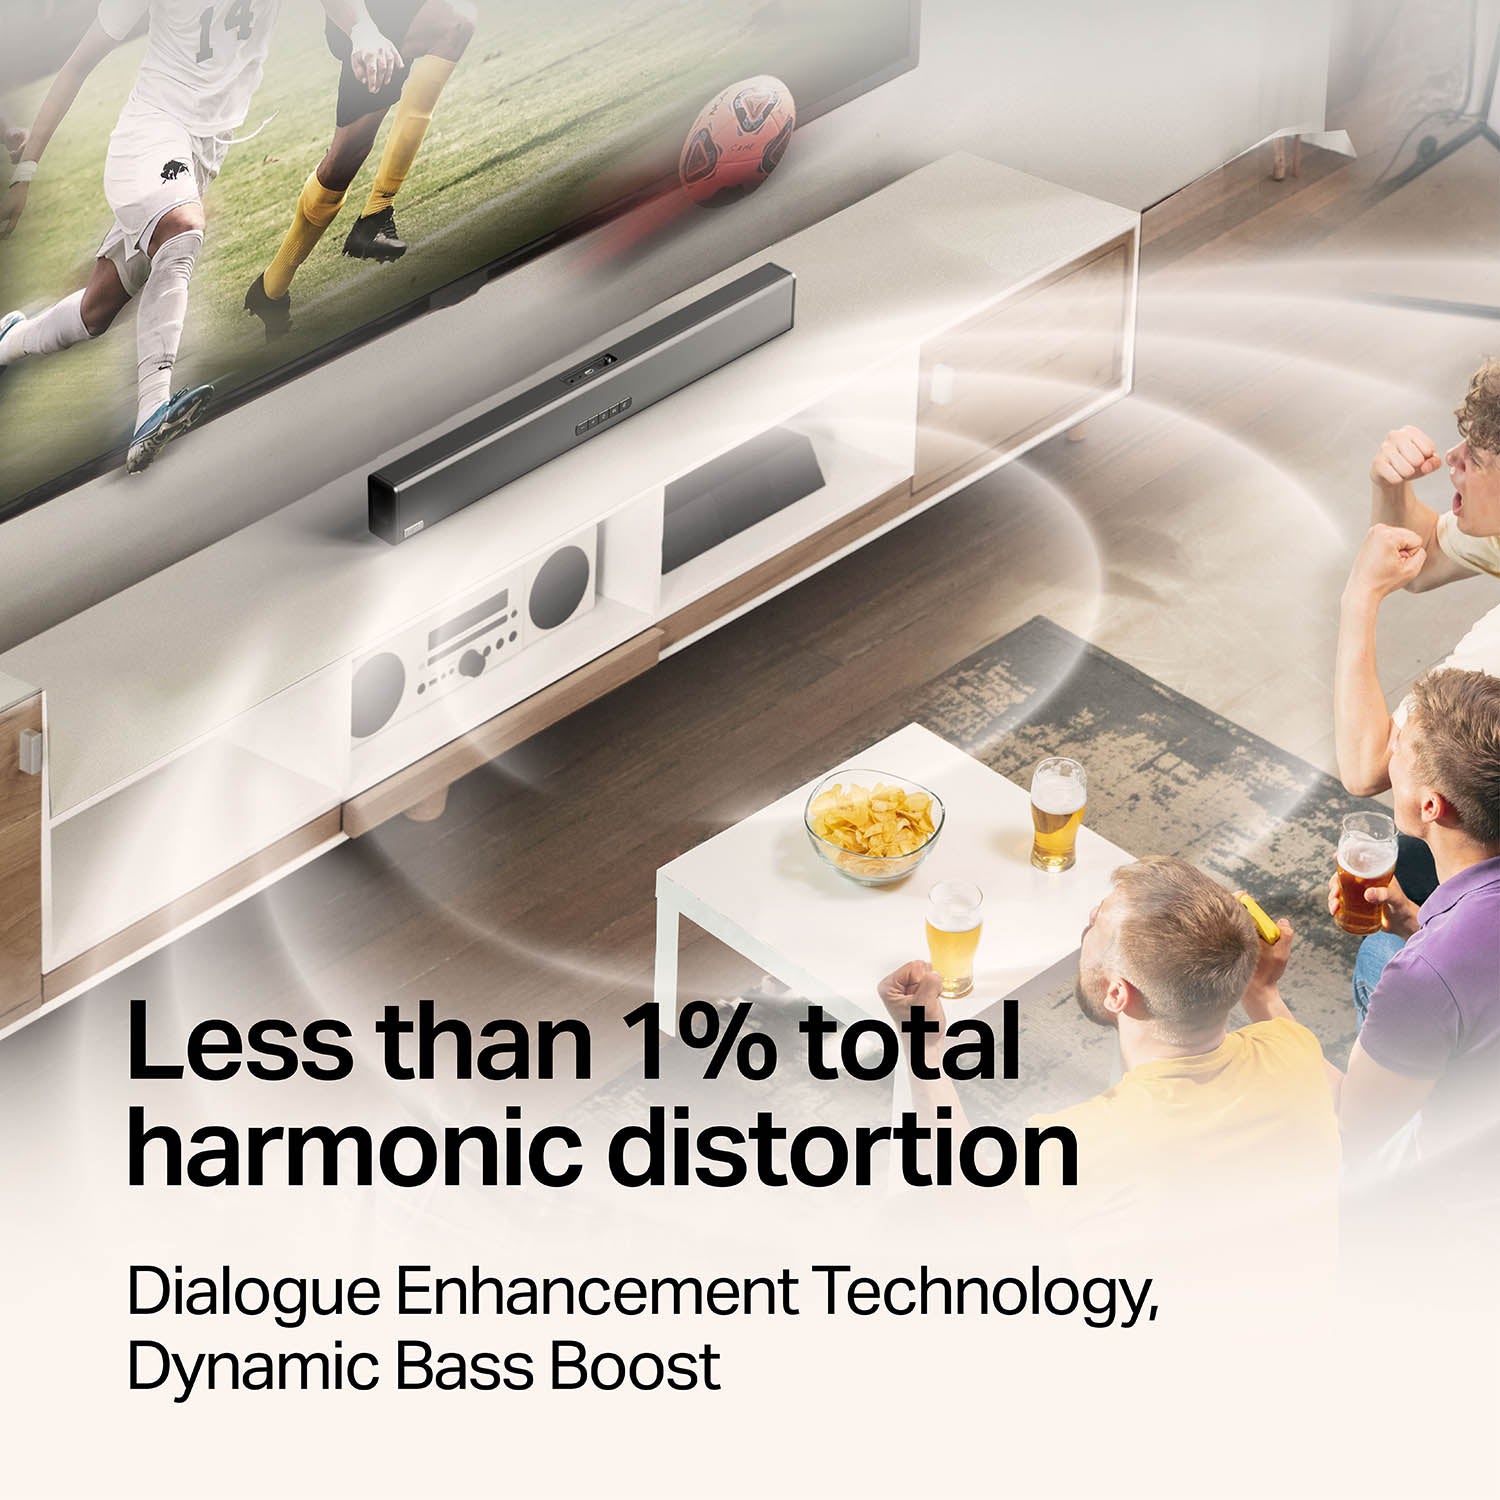 OXS S3 Soundbar for TV with Dialogue enhancement Technology can make details stand out With less than 1%  total harmonic distortion providing the sound reproduction